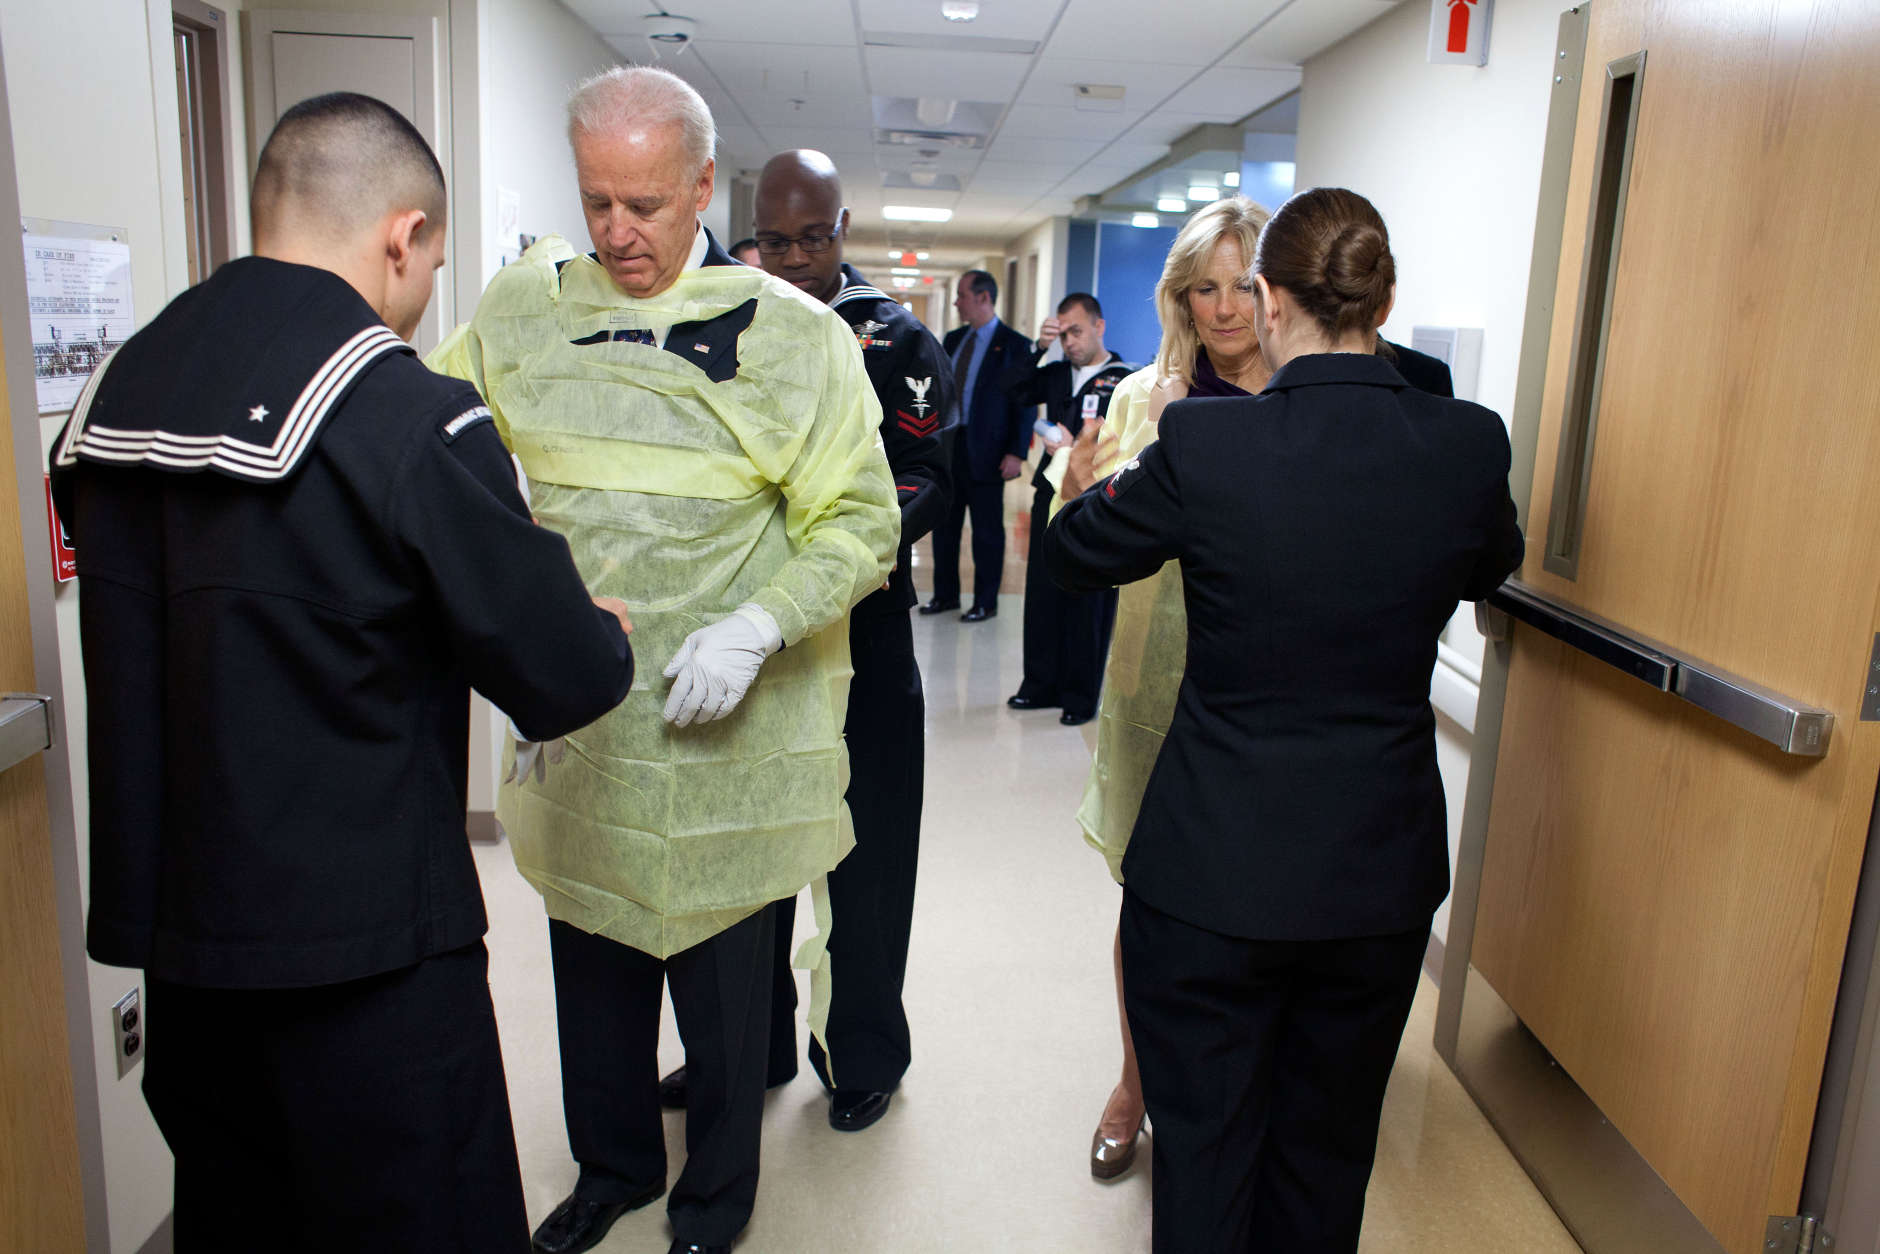 Navy corpsmen help Vice President Joe Biden and Dr. Jill Biden into gowns before meeting with patients and their families during a Christmas visit to Walter Reed National Military Medical Center in Bethesda, Md., Dec. 25, 2011. (Official White House Photo by David Lienemann)  

This official White House photograph is being made available only for publication by news organizations and/or for personal use printing by the subject(s) of the photograph. The photograph may not be manipulated in any way and may not be used in commercial or political materials, advertisements, emails, products, promotions that in any way suggests approval or endorsement of the President, the First Family, or the White House.